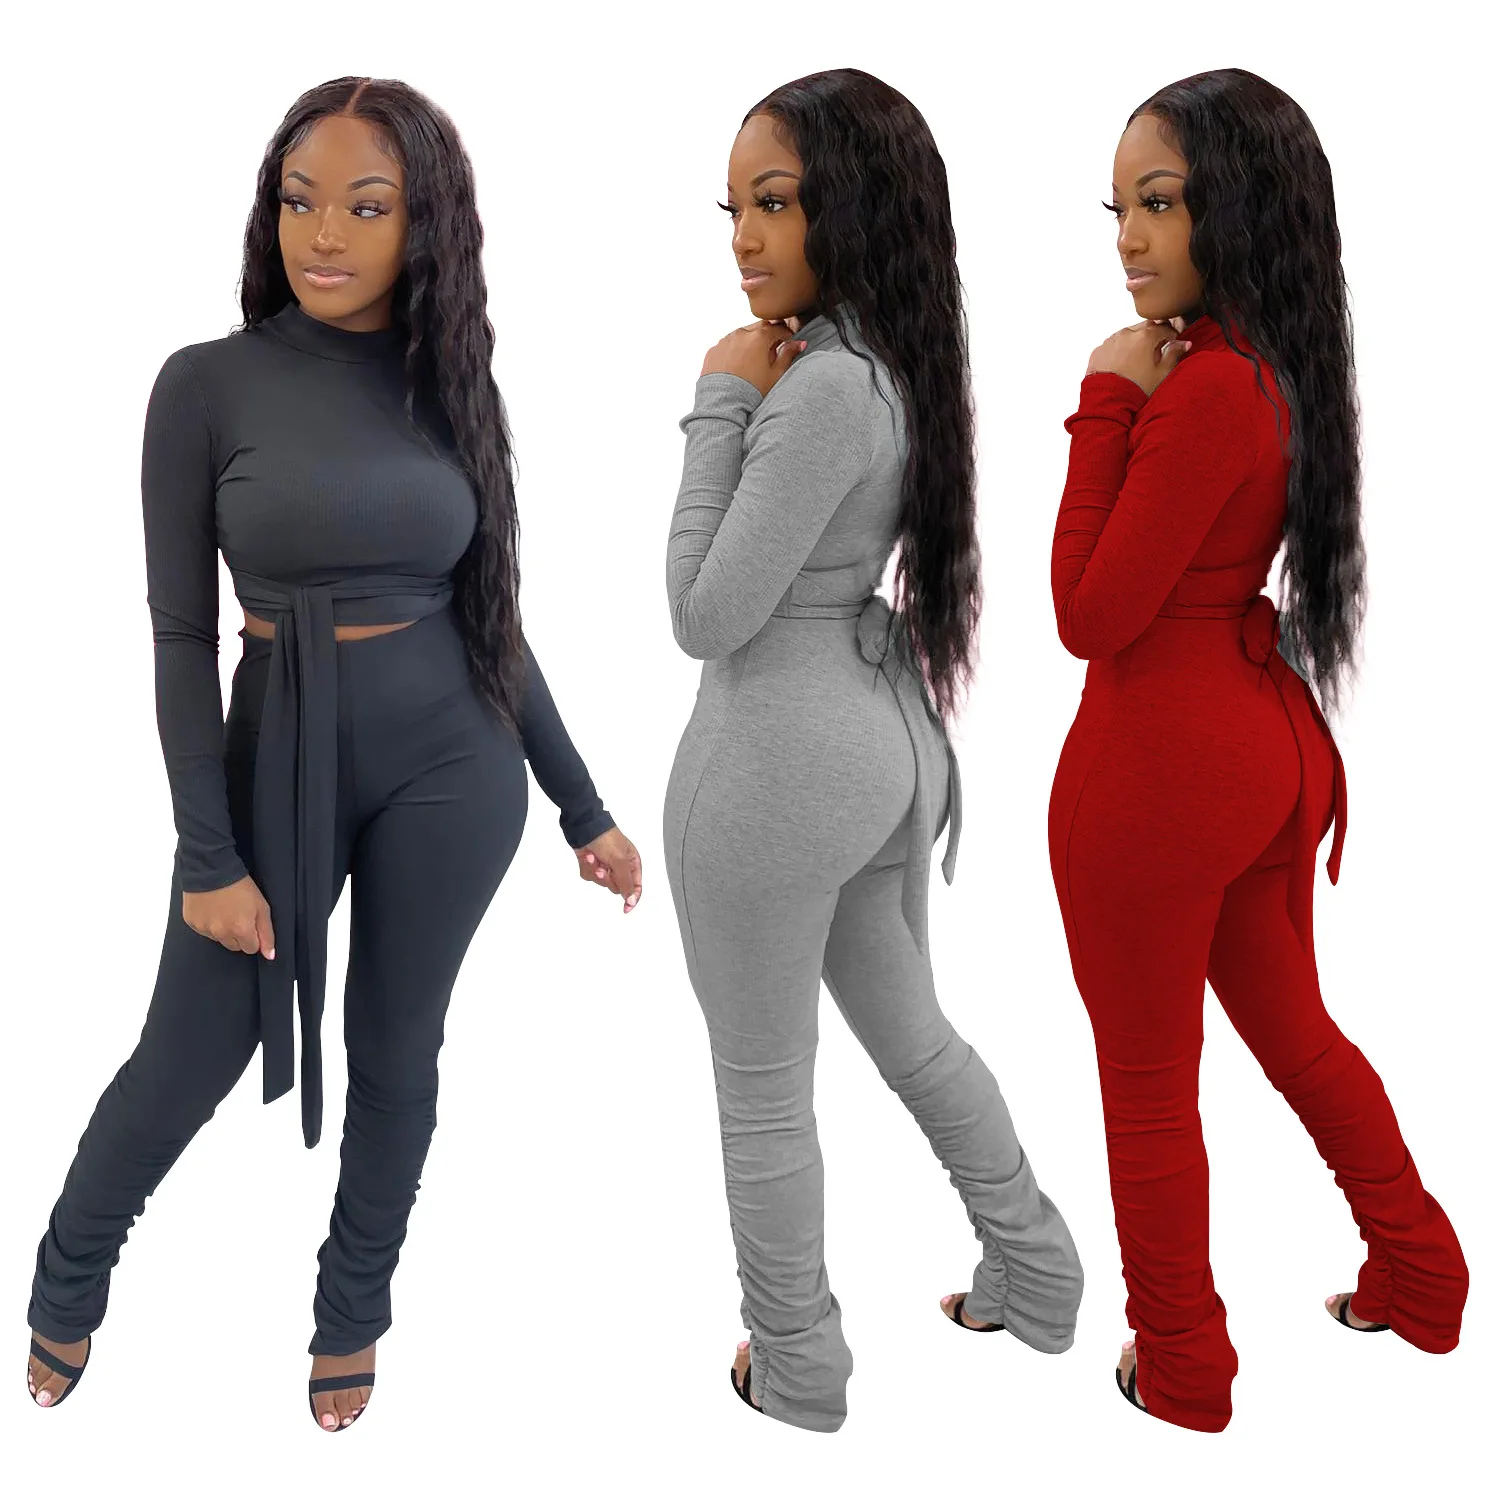 

Women Stacked Sweatpants suit For Women Fashion Sporting Joggers Skinny with Slit Women Stacked Pants 2 piece sets, Three different color